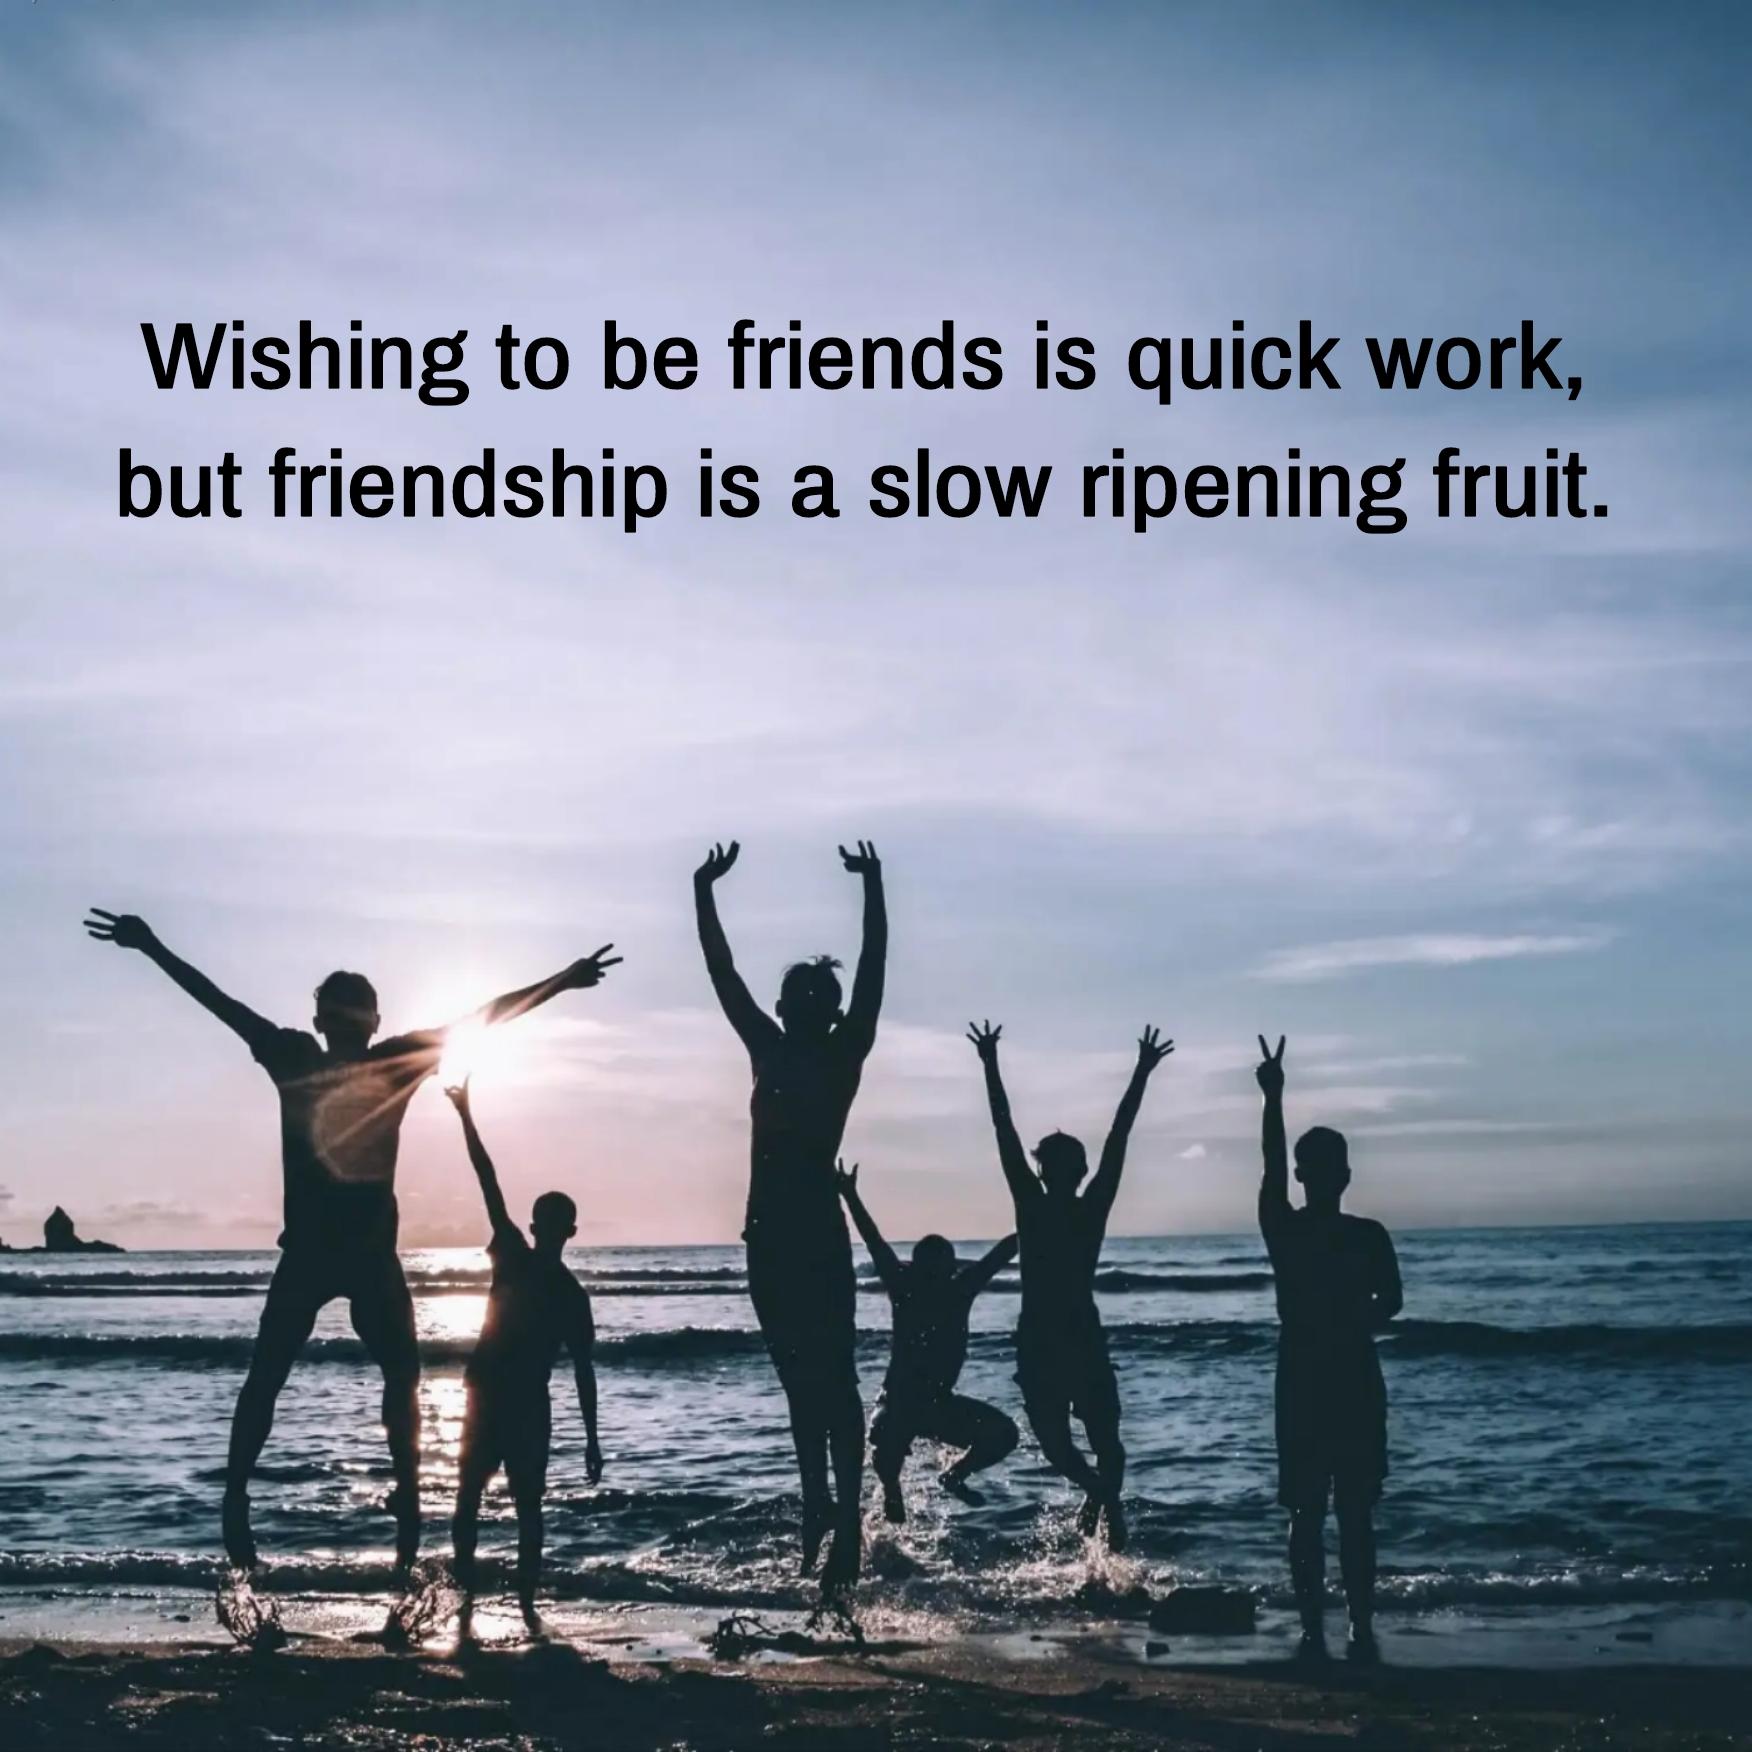 Wishing to be friends is quick work but friendship is a slow ripening fruit